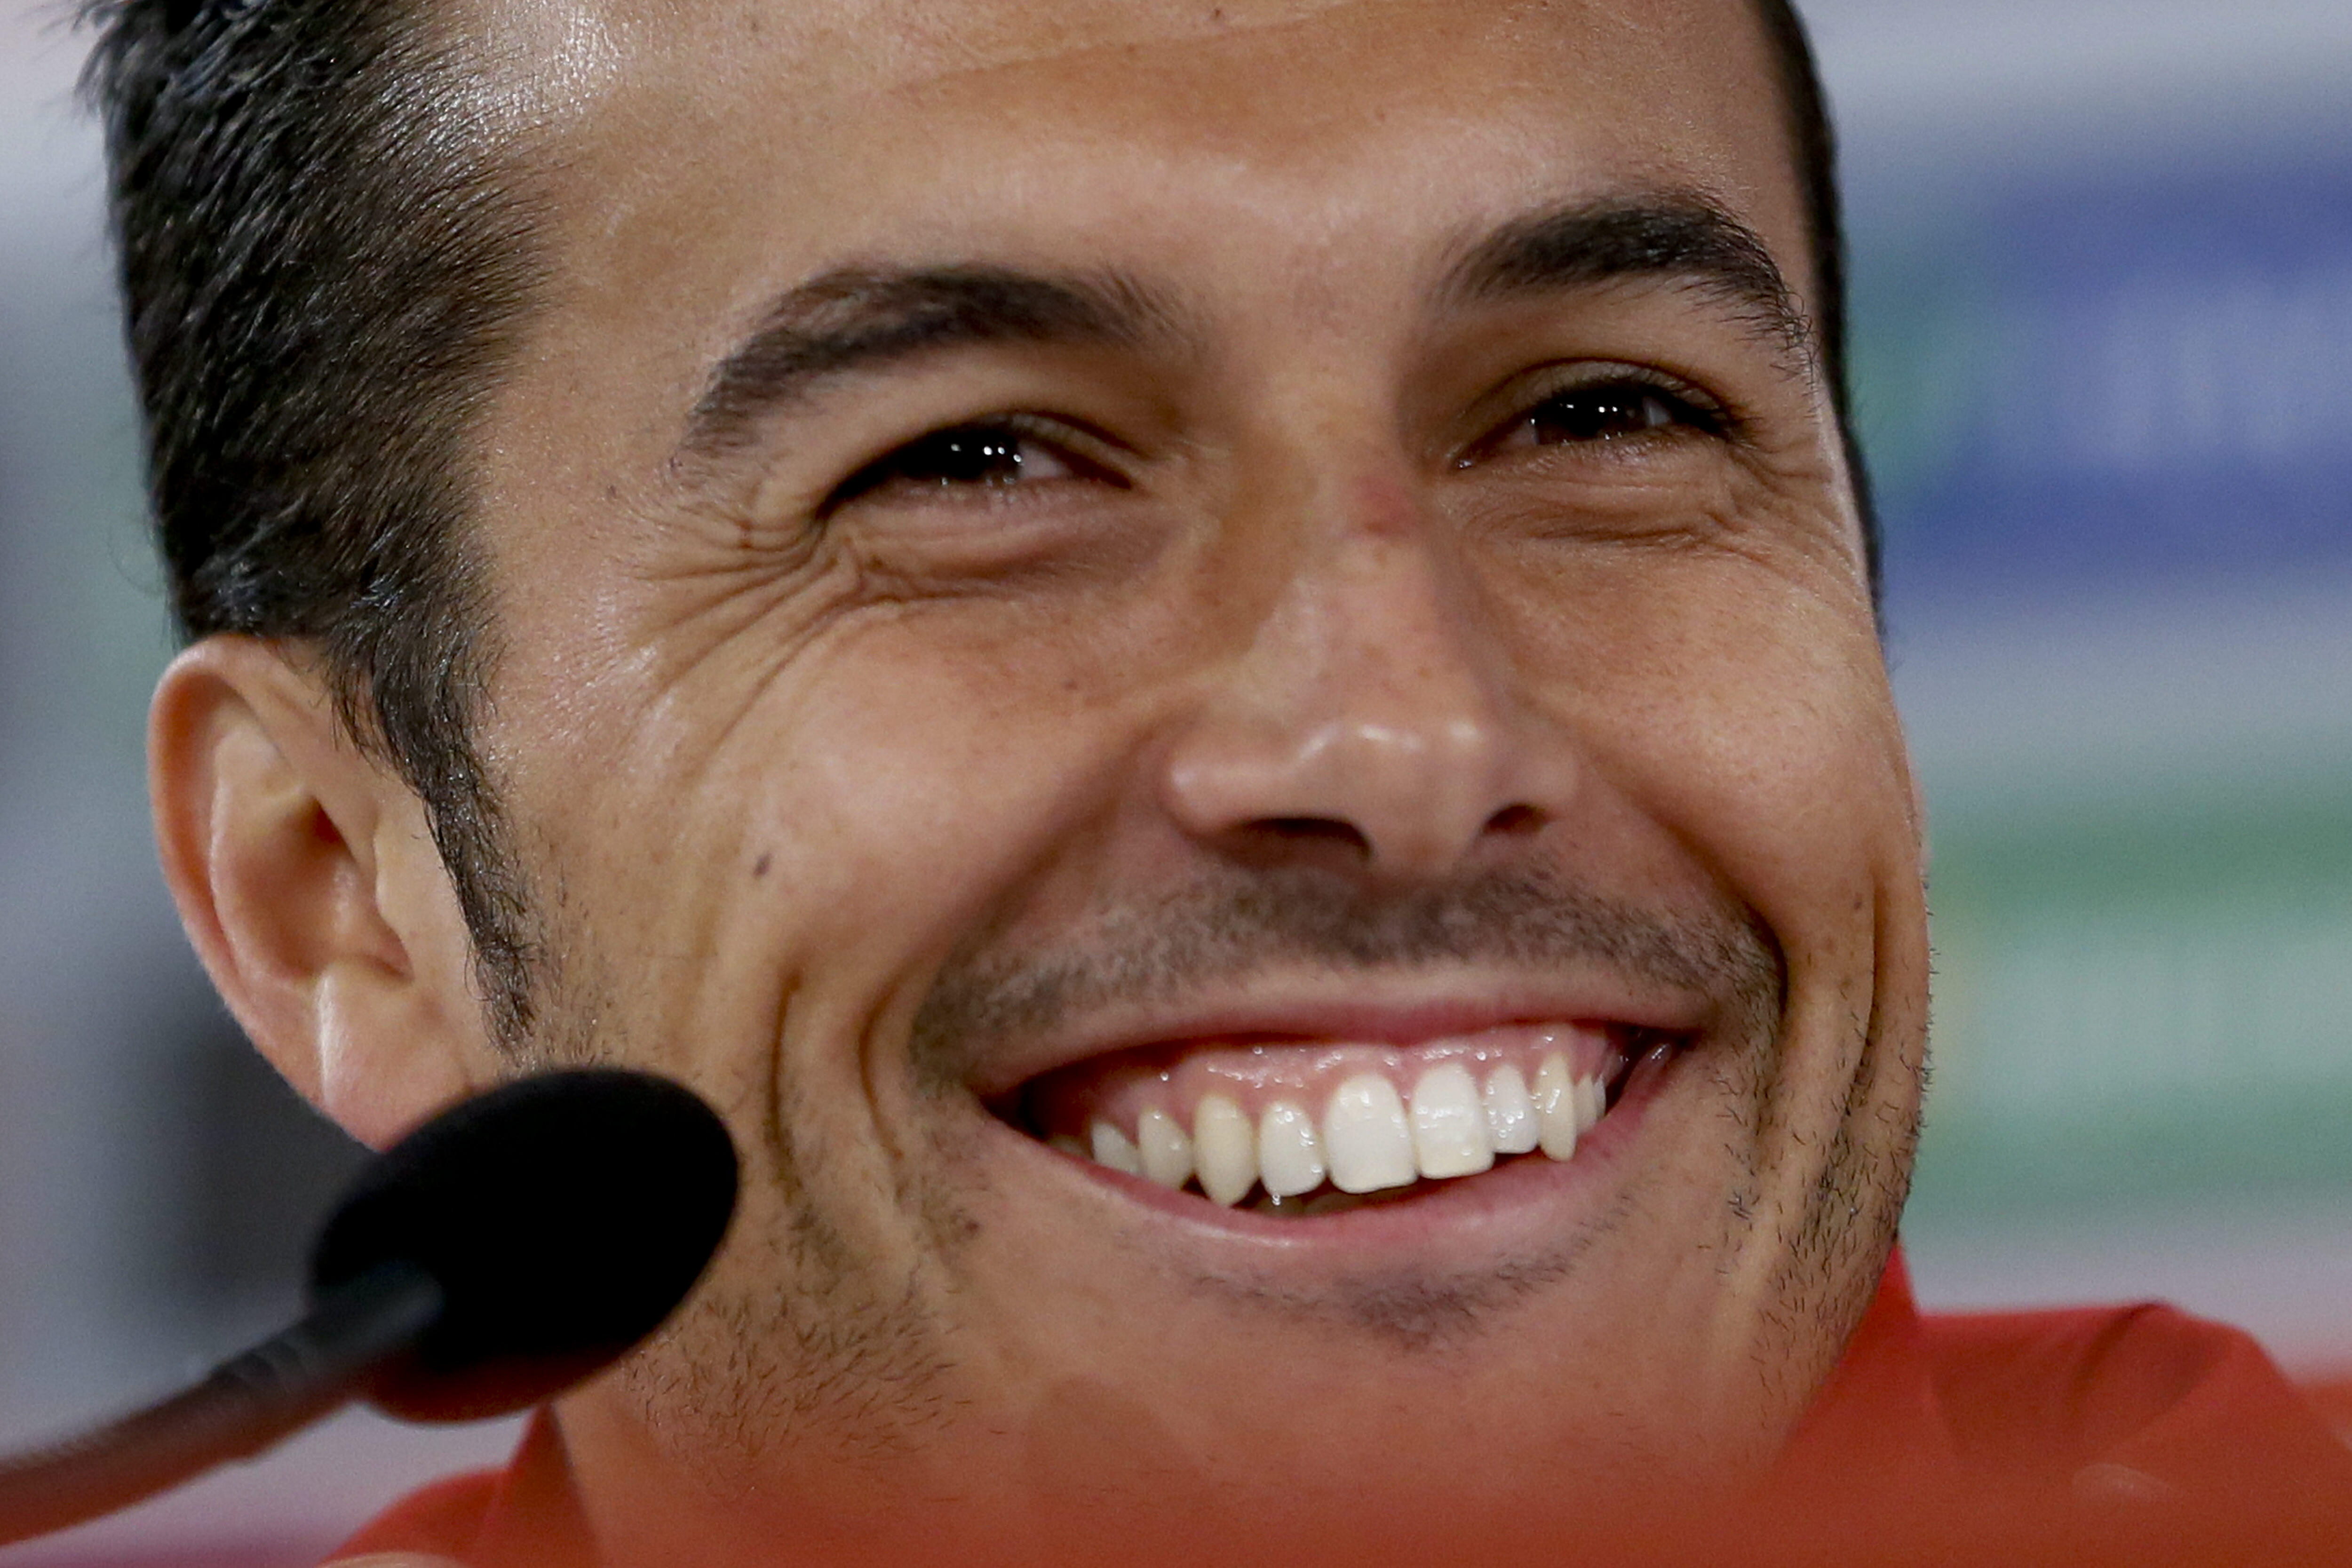 epa04261191 Pedro Rodriguez of the Spanish soccer team during a press conference in Curitiba, Brazil, 16 June 2014. Spain will face Chile in their second match of group B for the FIFA World Cup Brazil 2014 at Maracana stadium in Rio de Janeiro on 18 June 2014.  EPA/JuanJo Martin